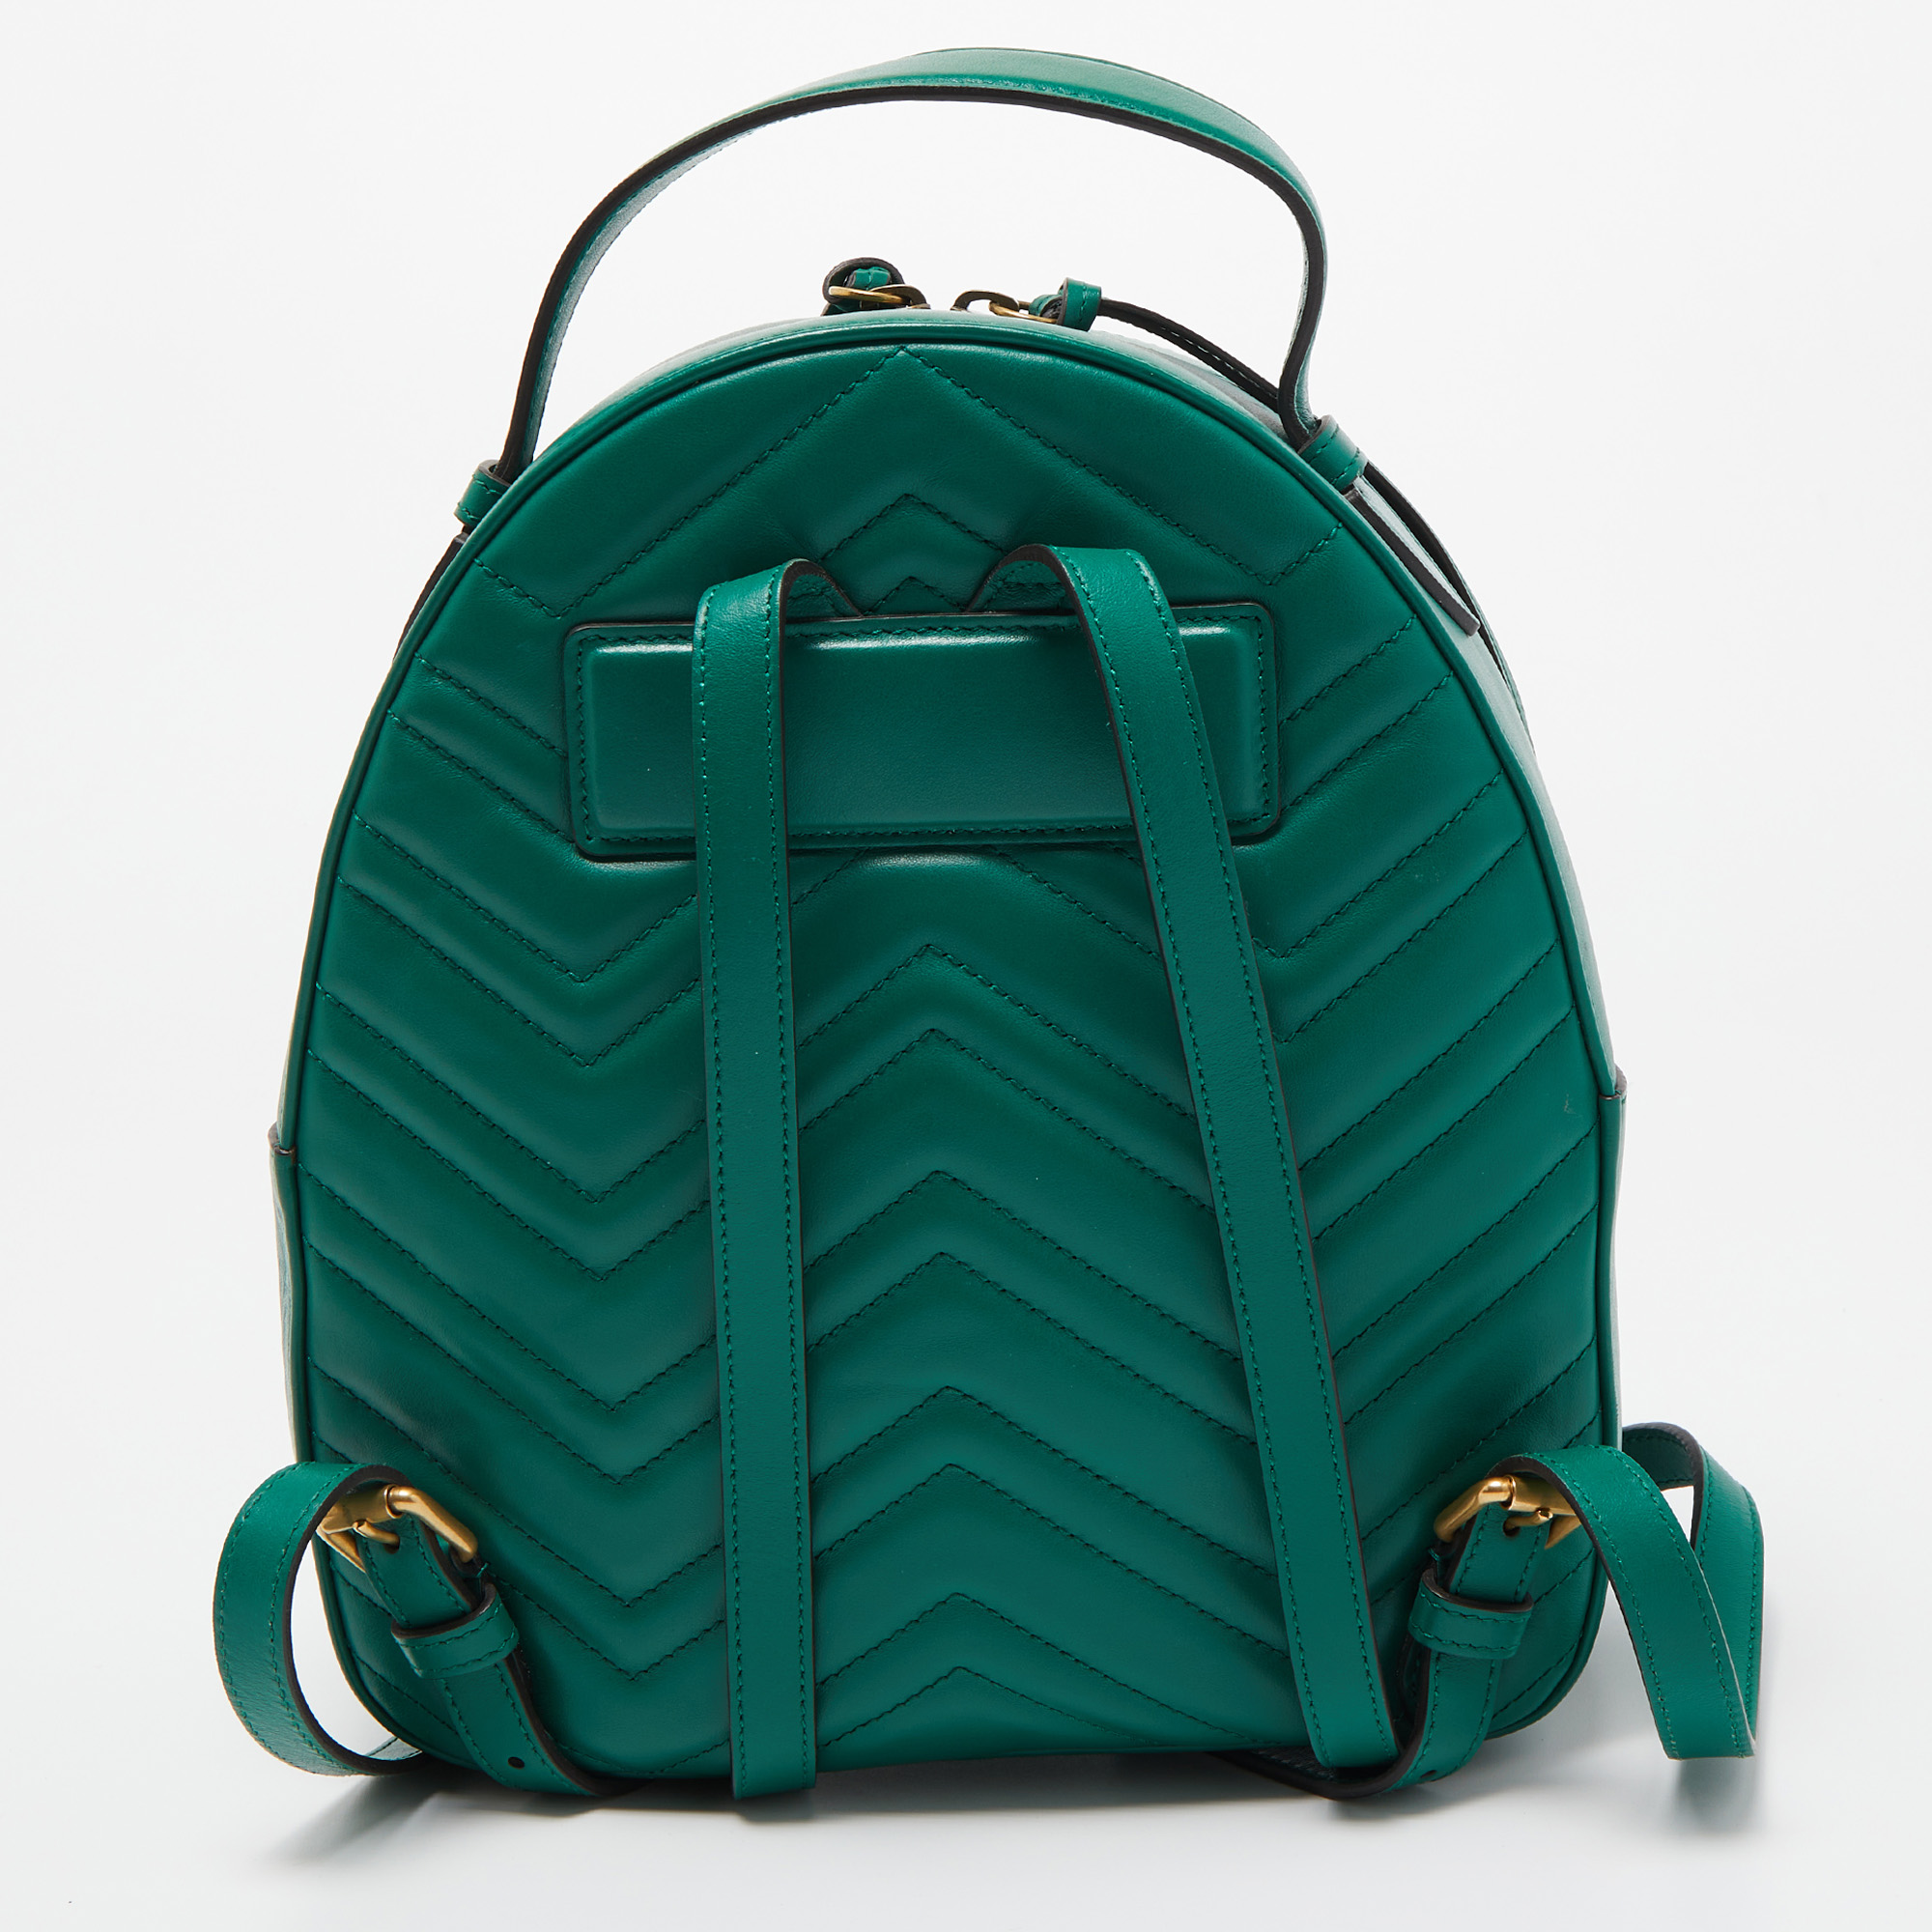 Gucci Green Matelassé Leather GG Marmont Backpack